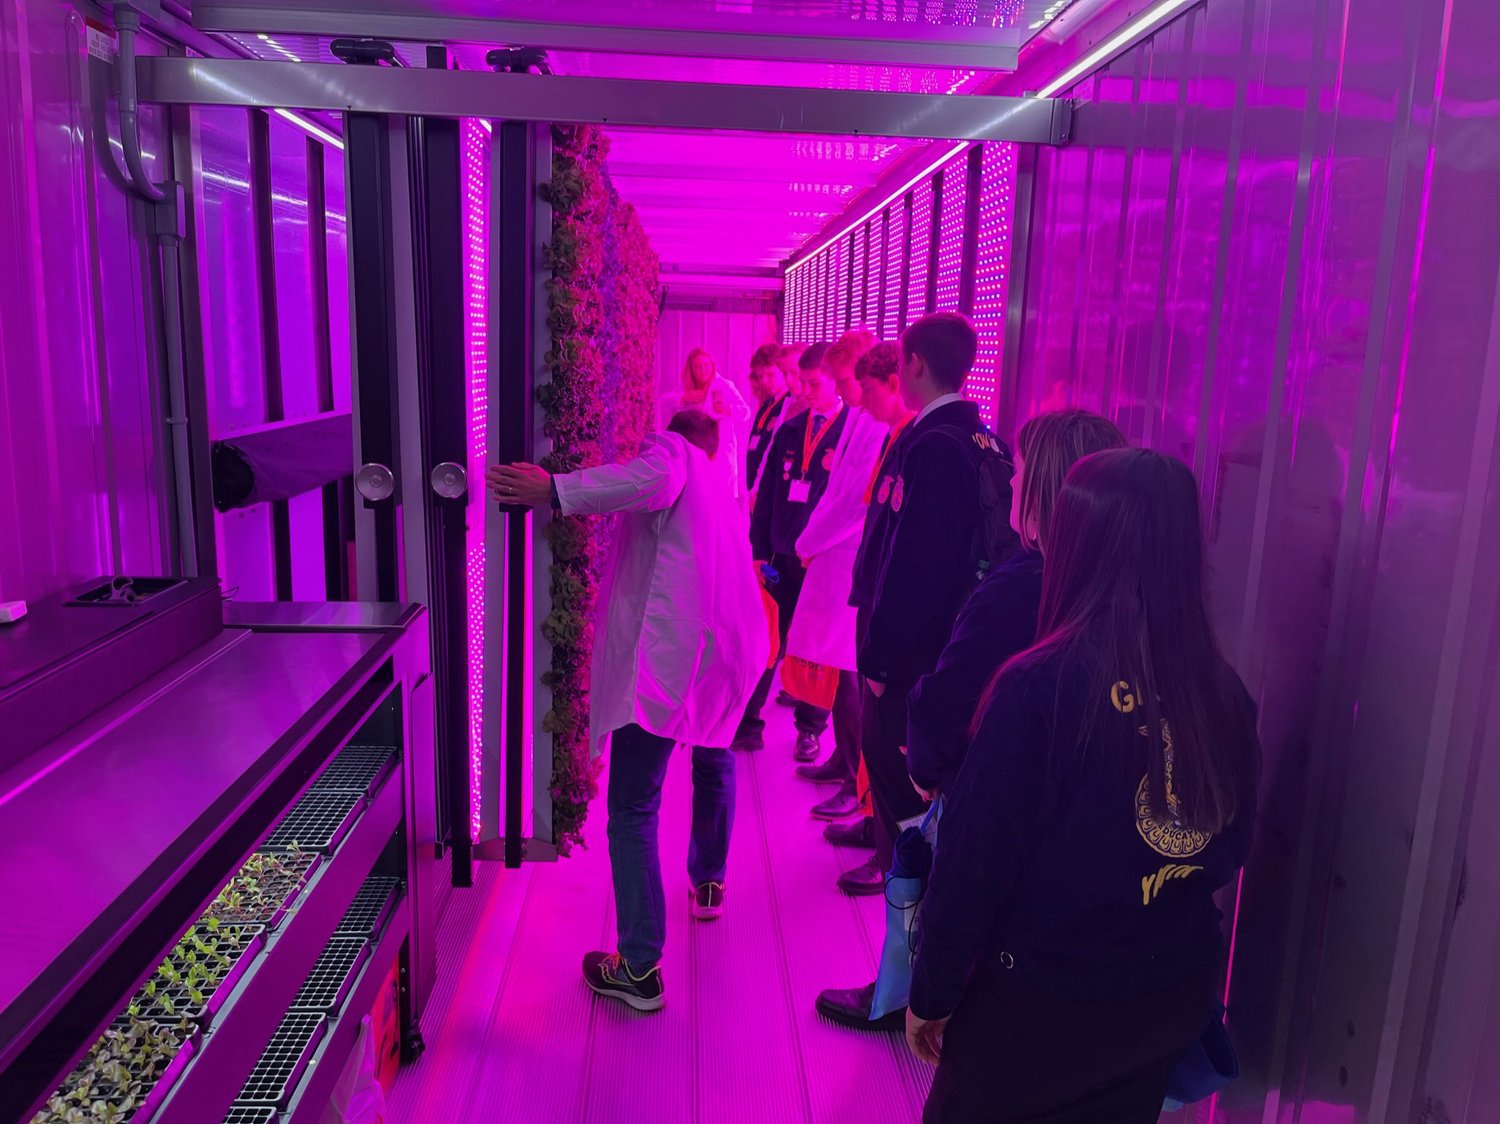 Freight Farms works with FFA chapters to create immersive agriculture programs.